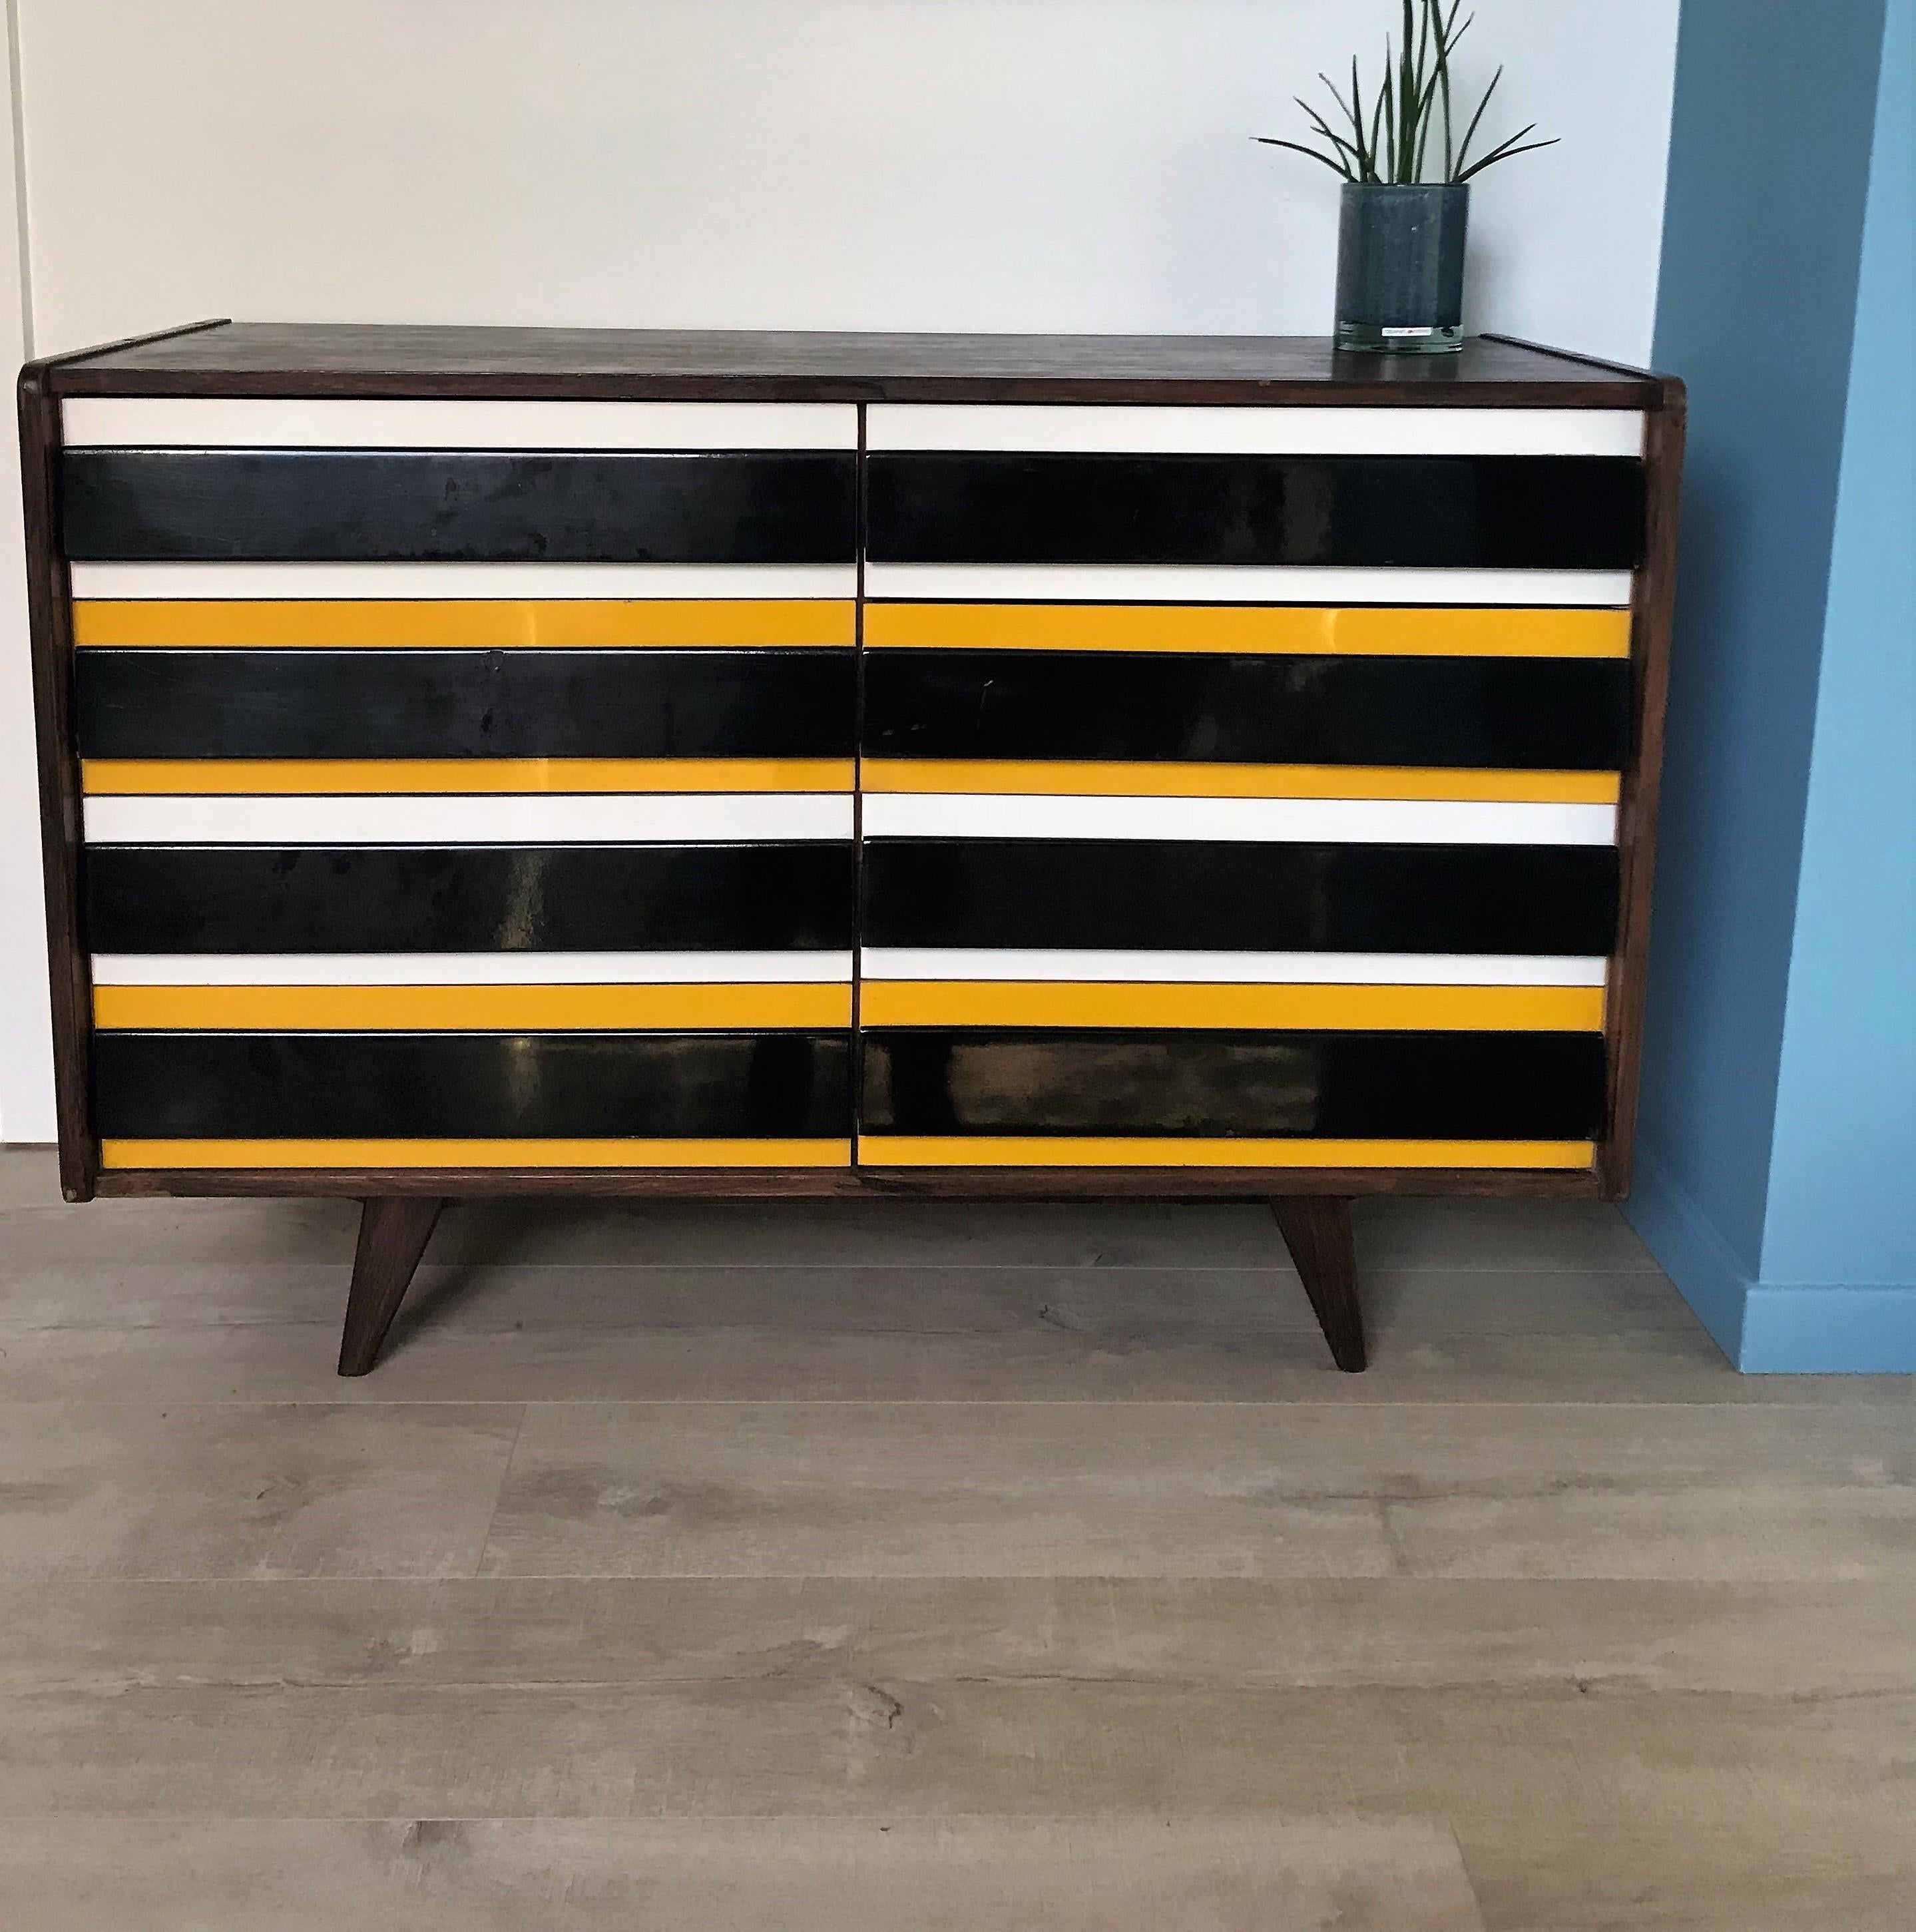 Midcentury cabinet designed by Jiri Jiroutek for interier Praha.

The cabinet features 8 lacquered drawers in yellow, black and white colors.

Labeled at the back.

Good overall condition, some slight signs of wear consistent with age and